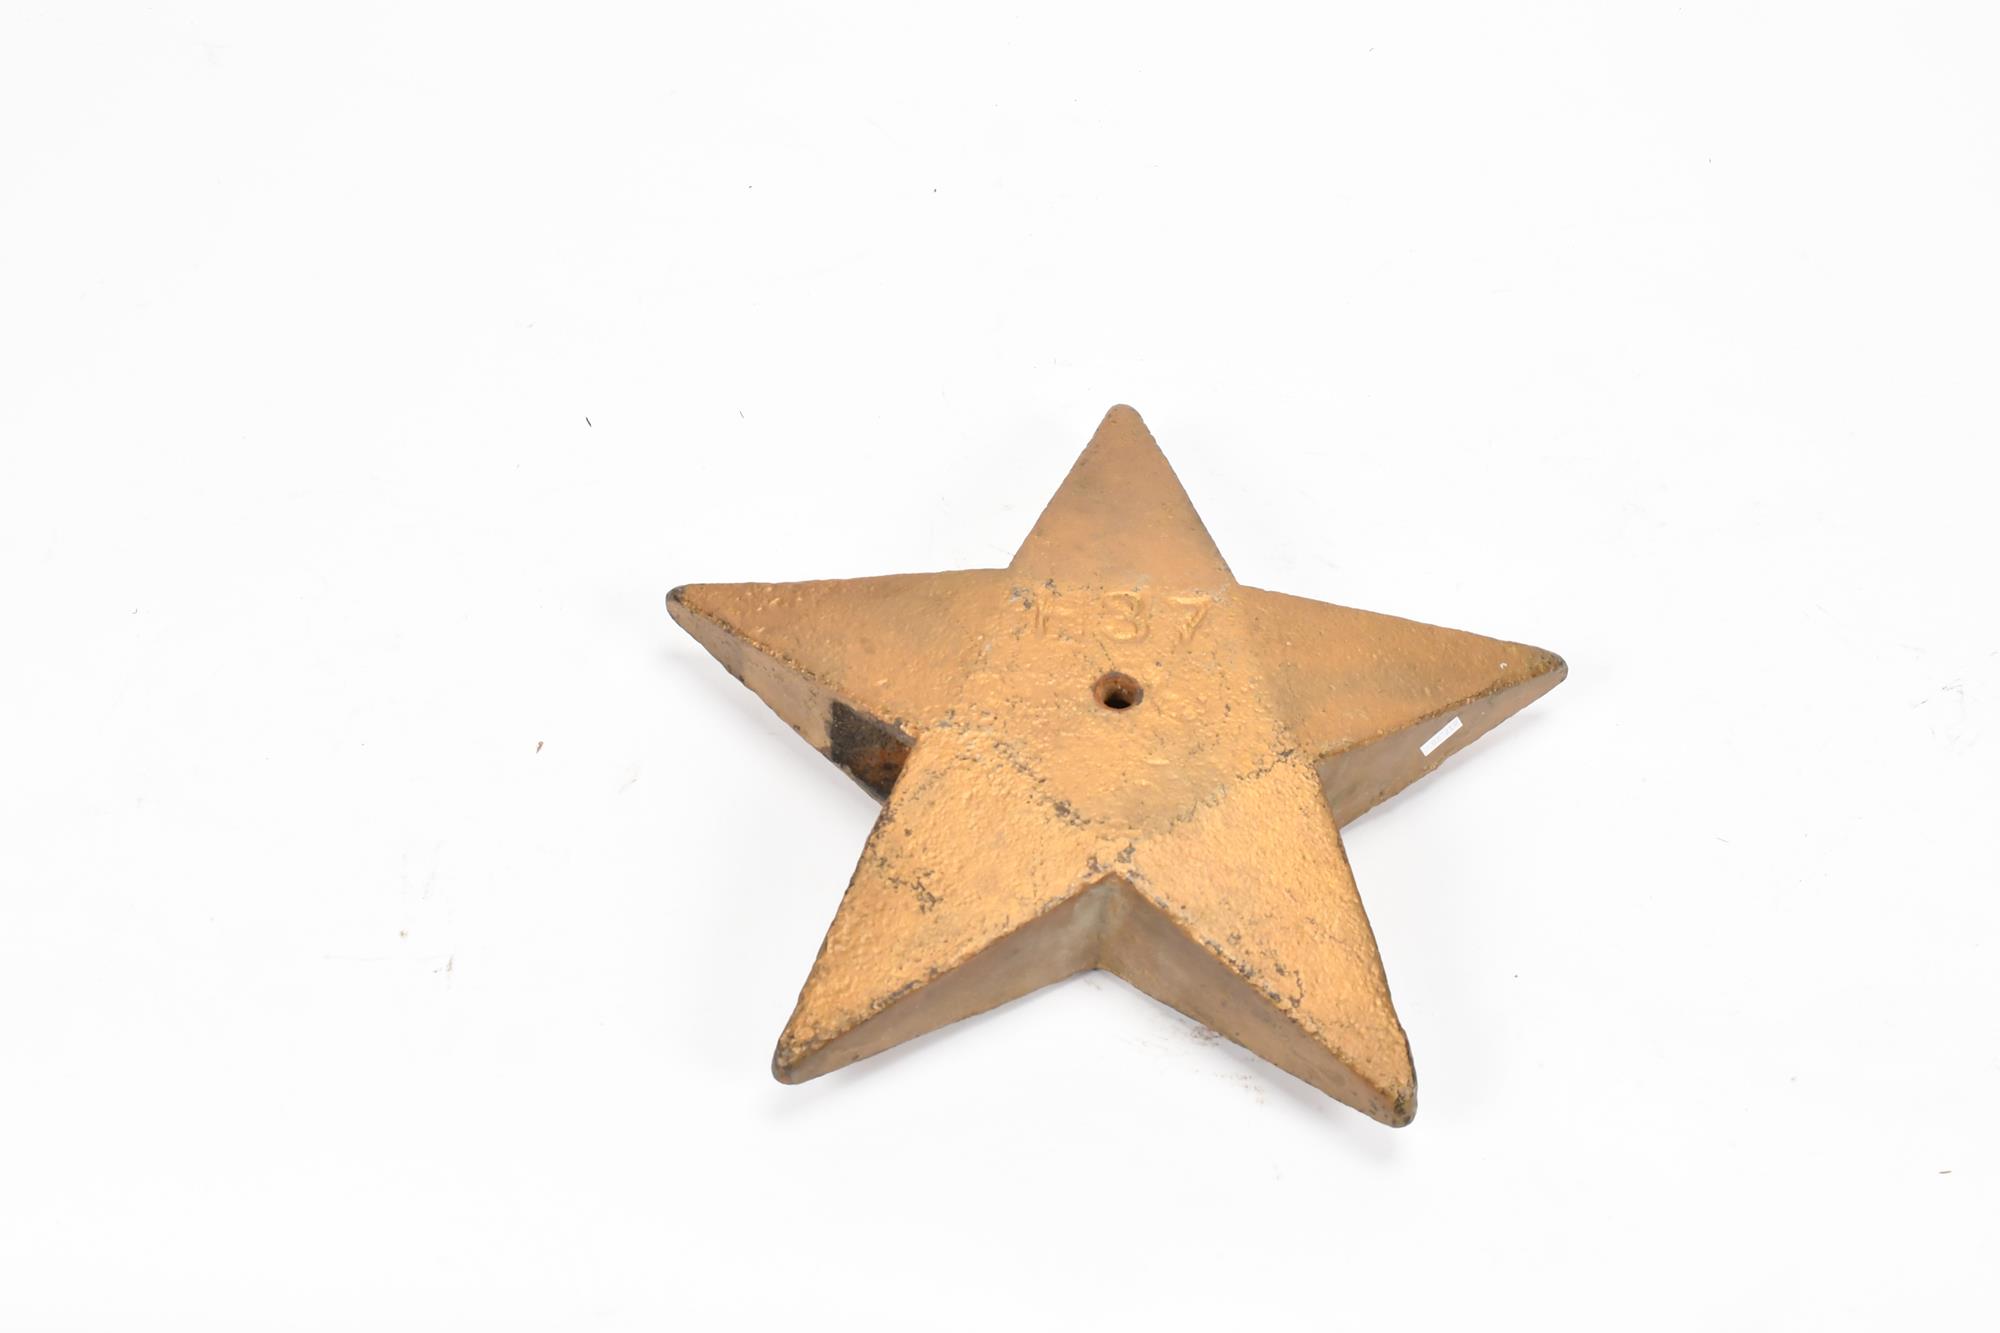 ANTIQUE STAR FORM IRON MILL WEIGHT.